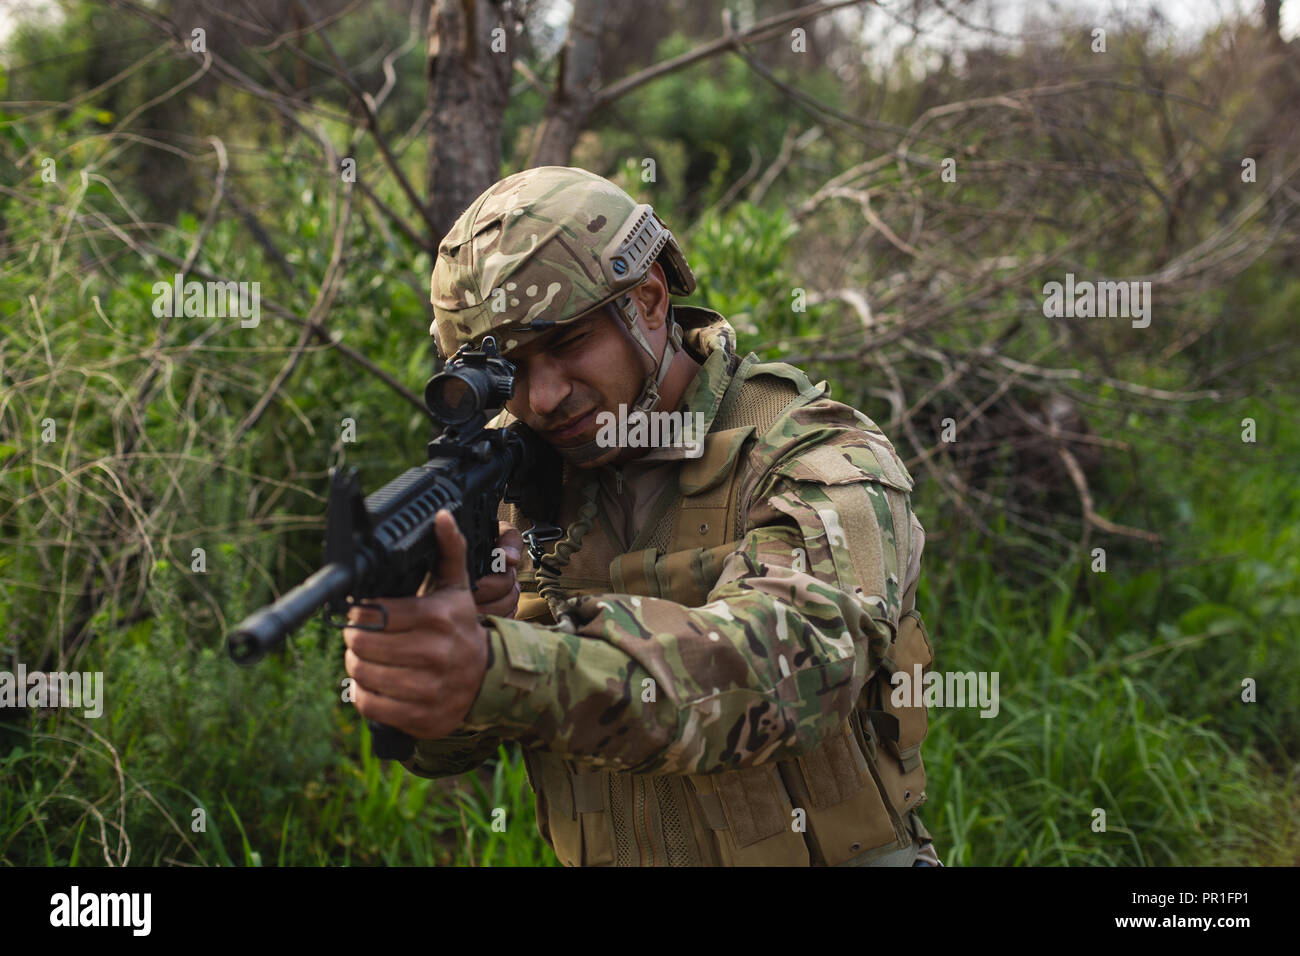 Military soldier training during military training Stock Photo